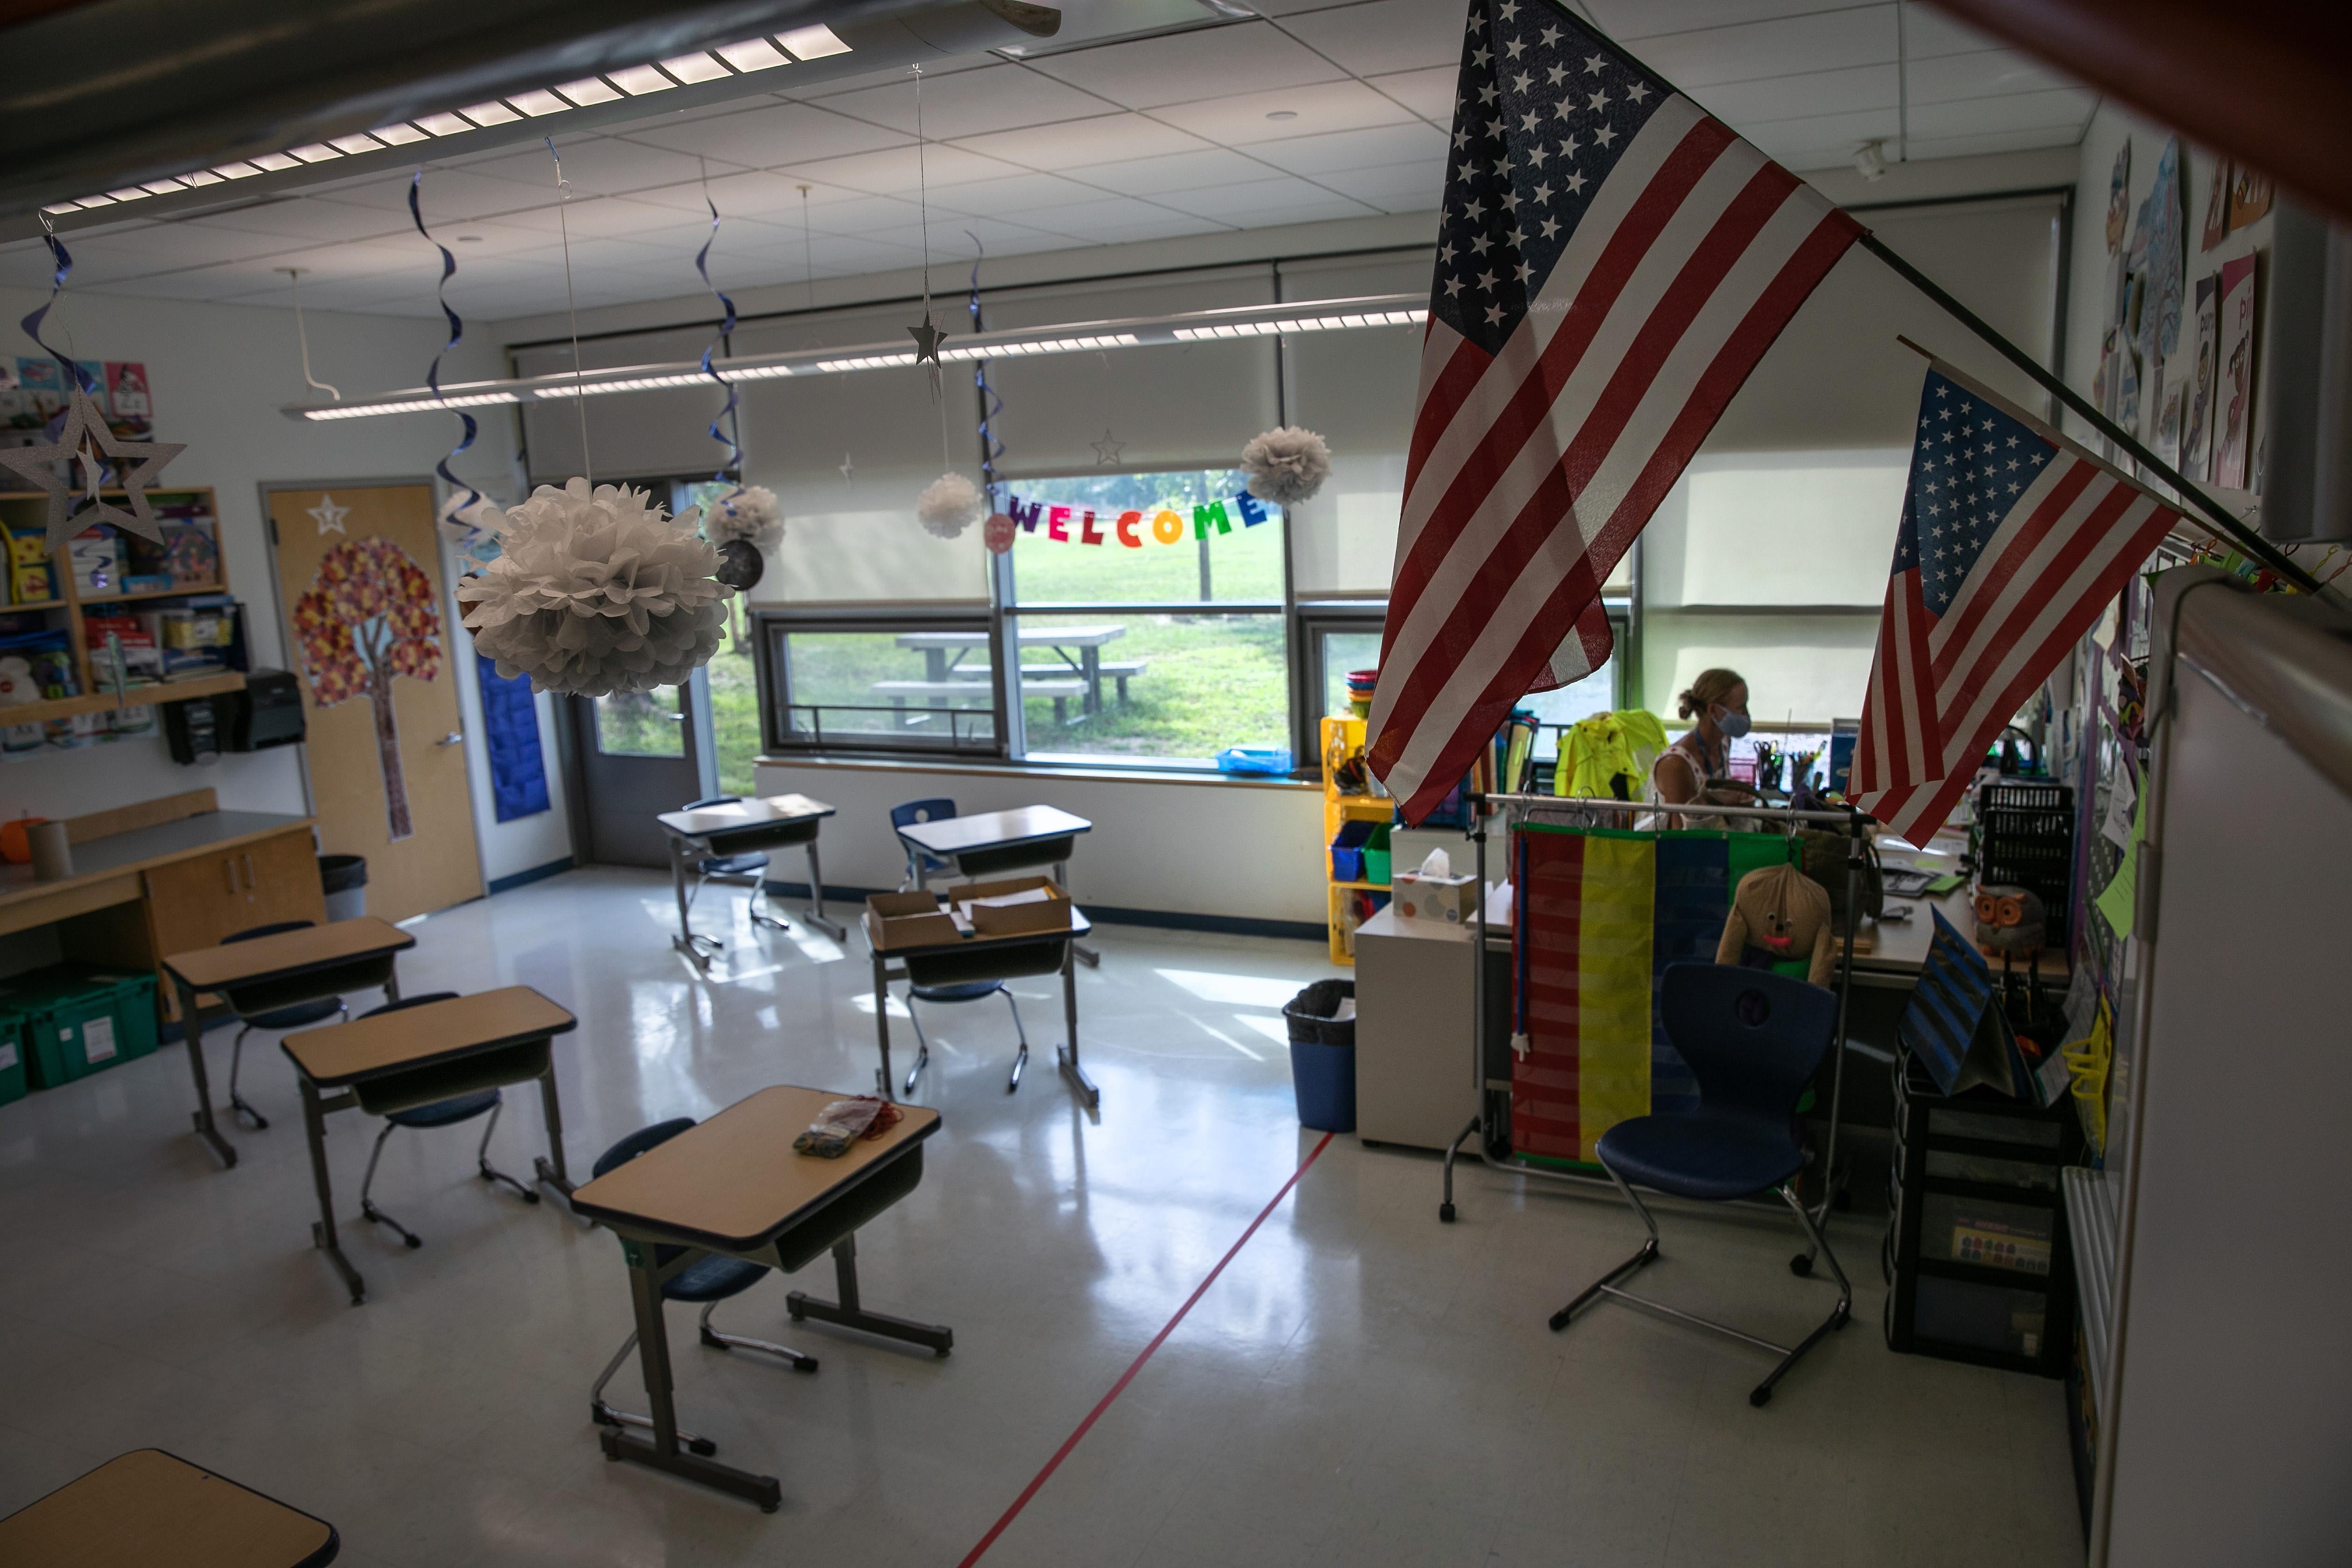 U.S. flags wave over a classroom with empty desks.